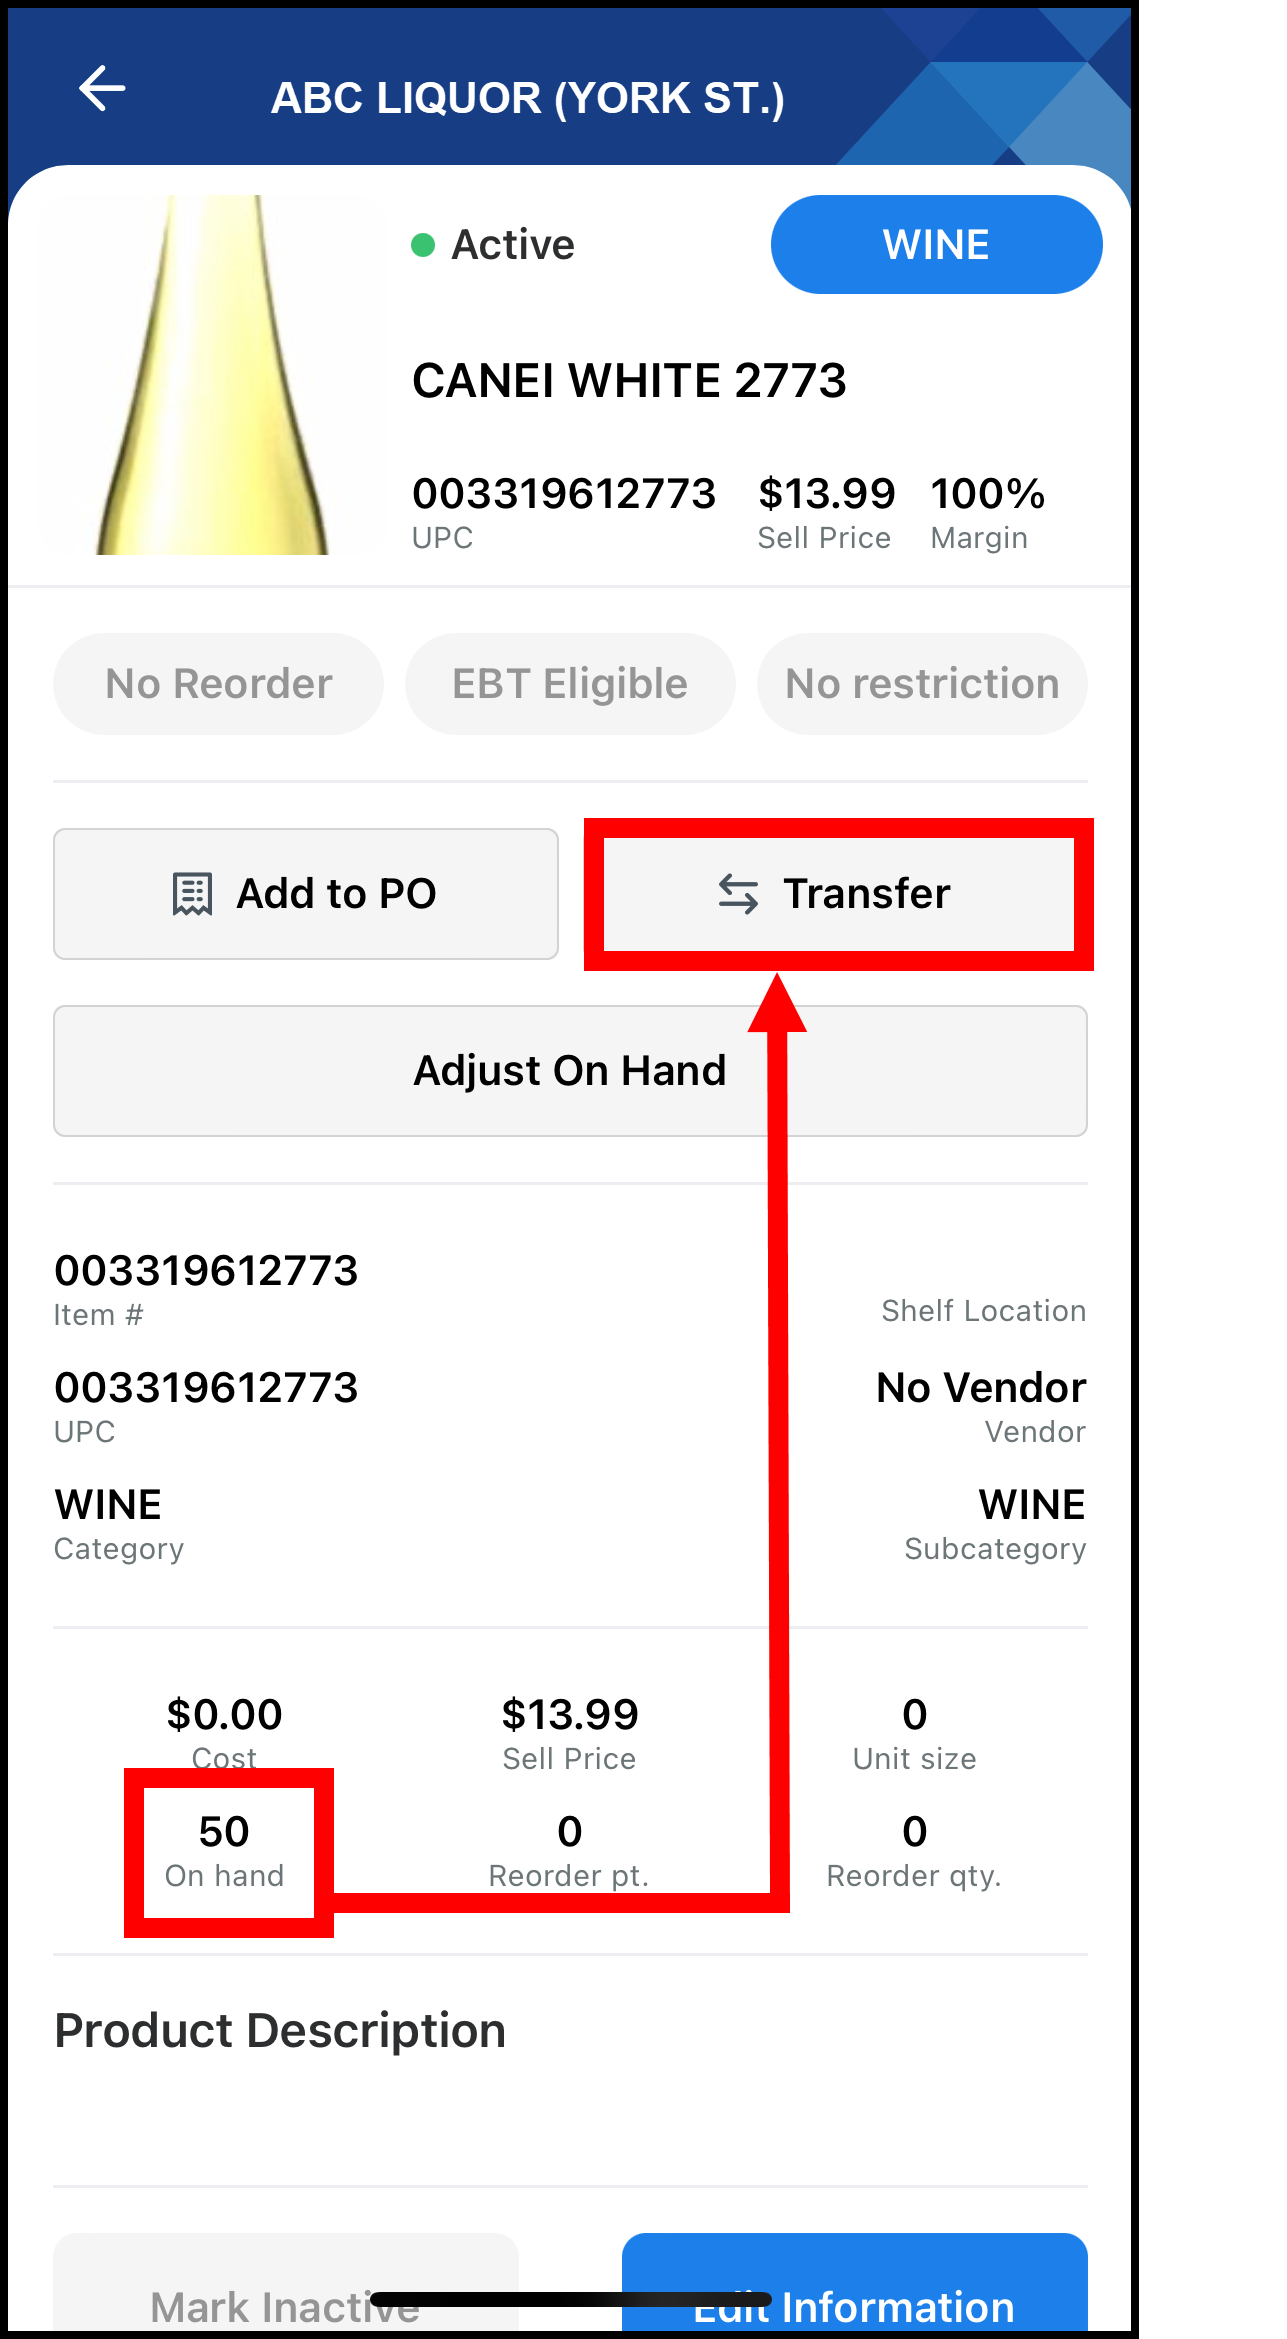 On hand value of 50 highlighted with arrow leading to transfer button